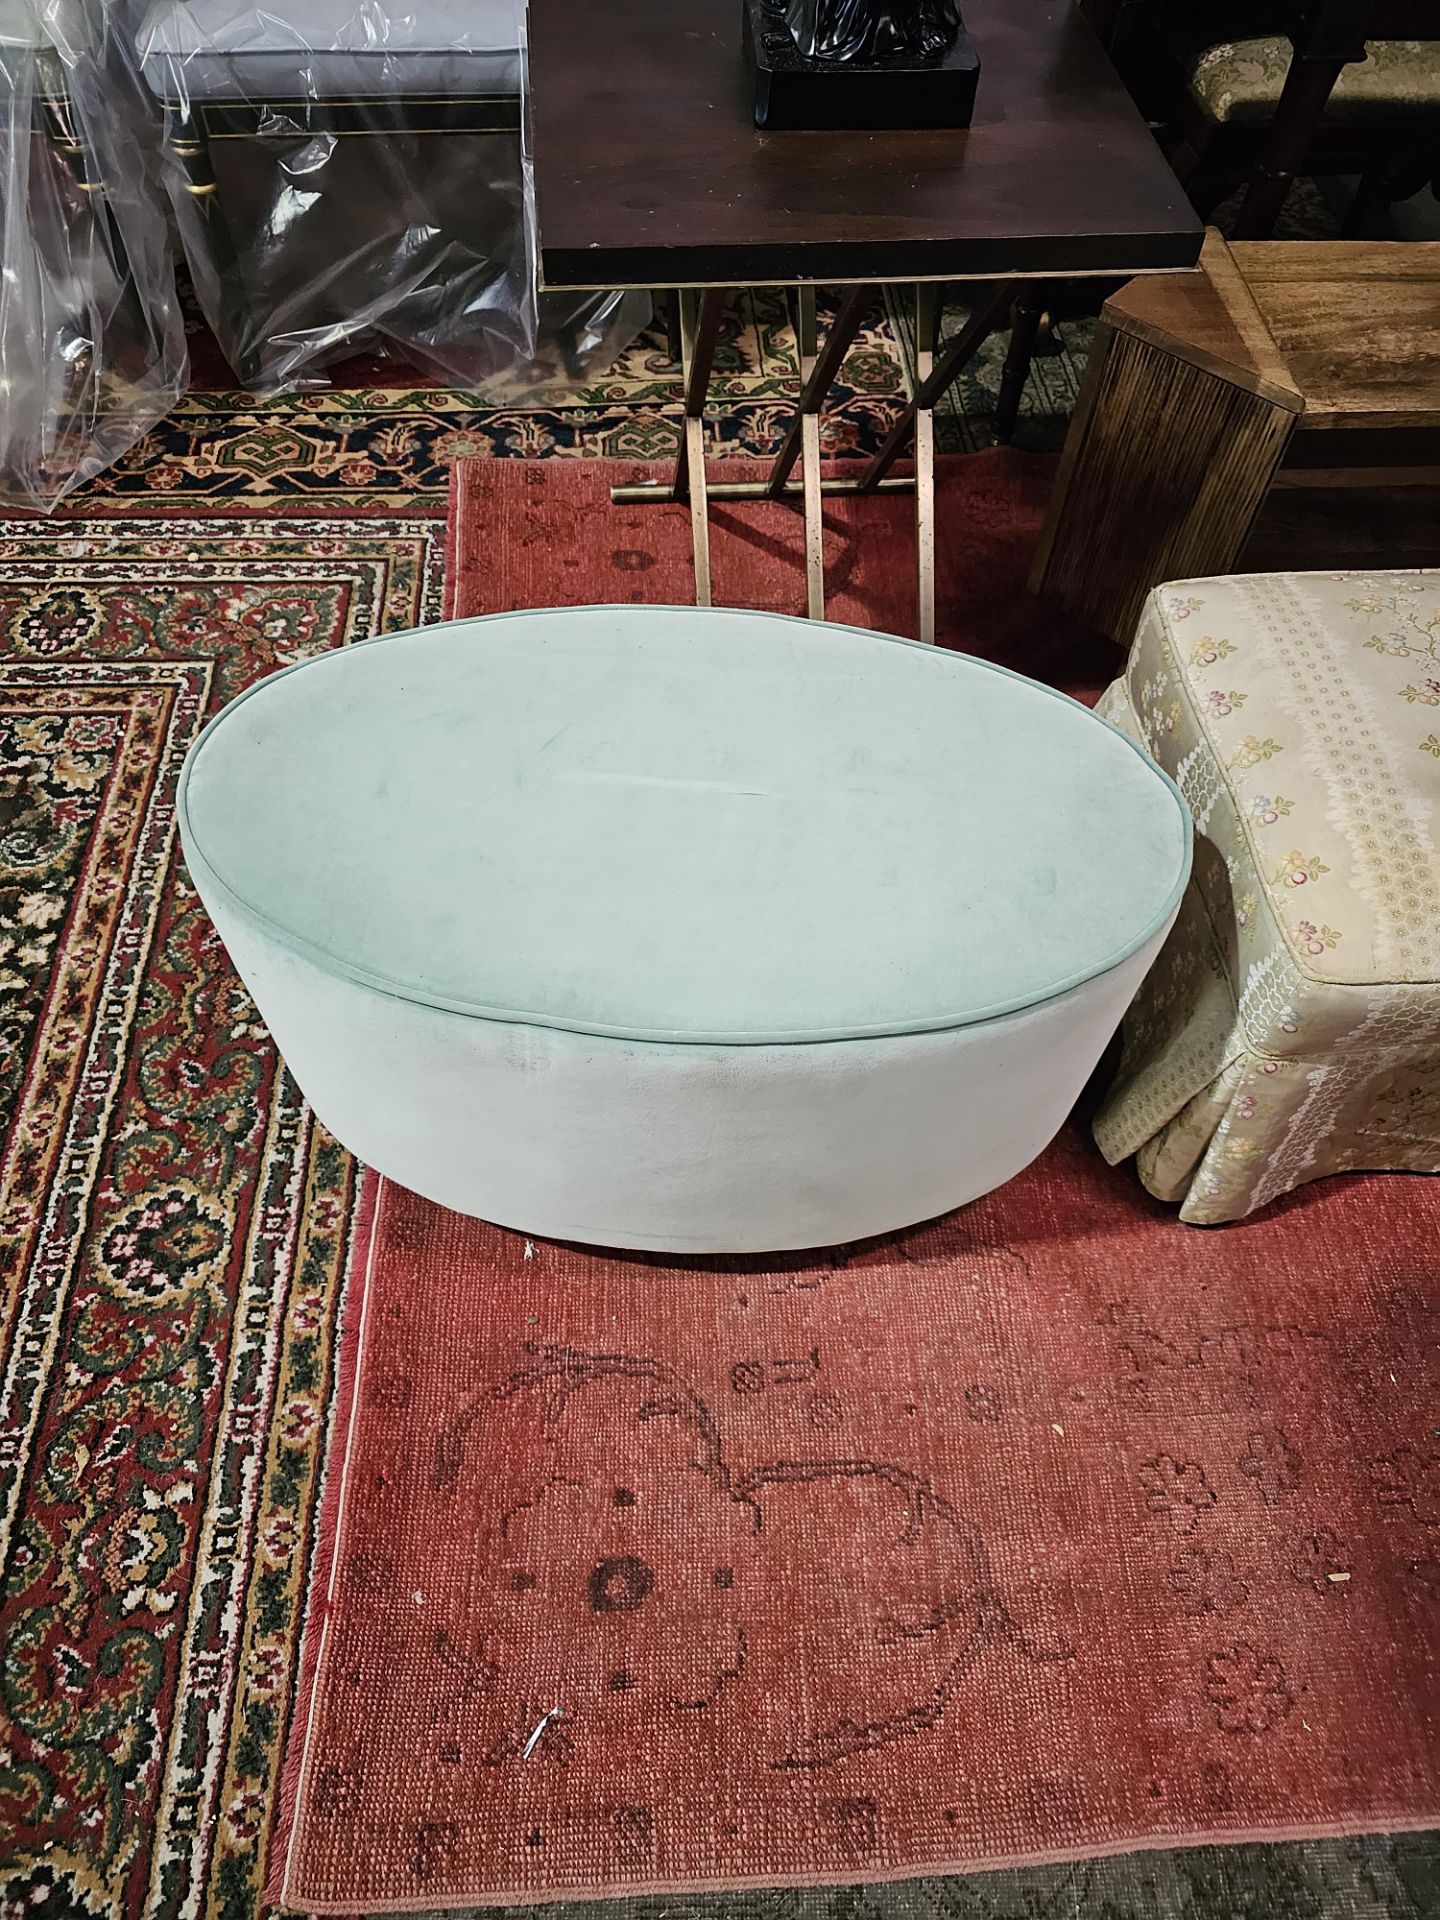 Velvet Ovoid Mint Foot Stool Small Damage To Base 80 x 45 x 46cm (ST17) This Item Is Either - Image 3 of 3